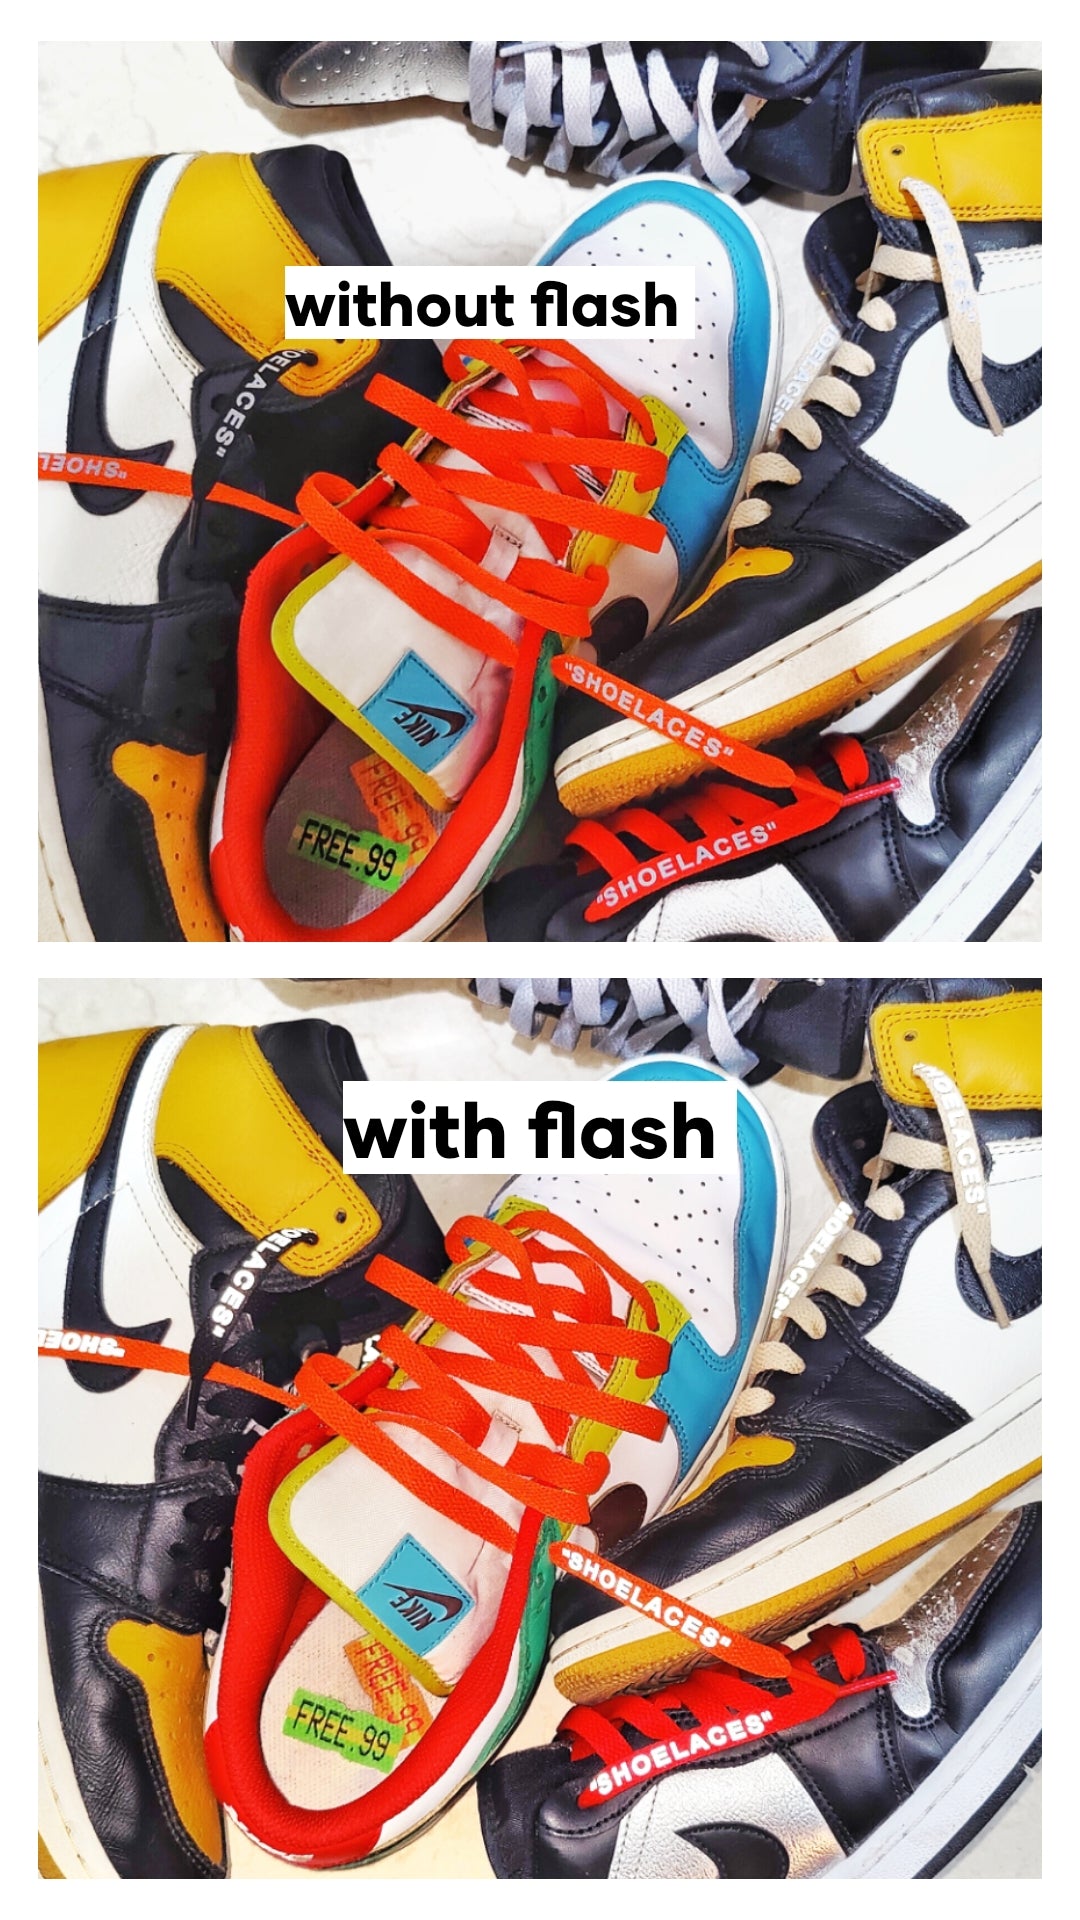 Off-White Style "Shoelaces Reflective" Flat lace 2 pair combo by thegoodlace